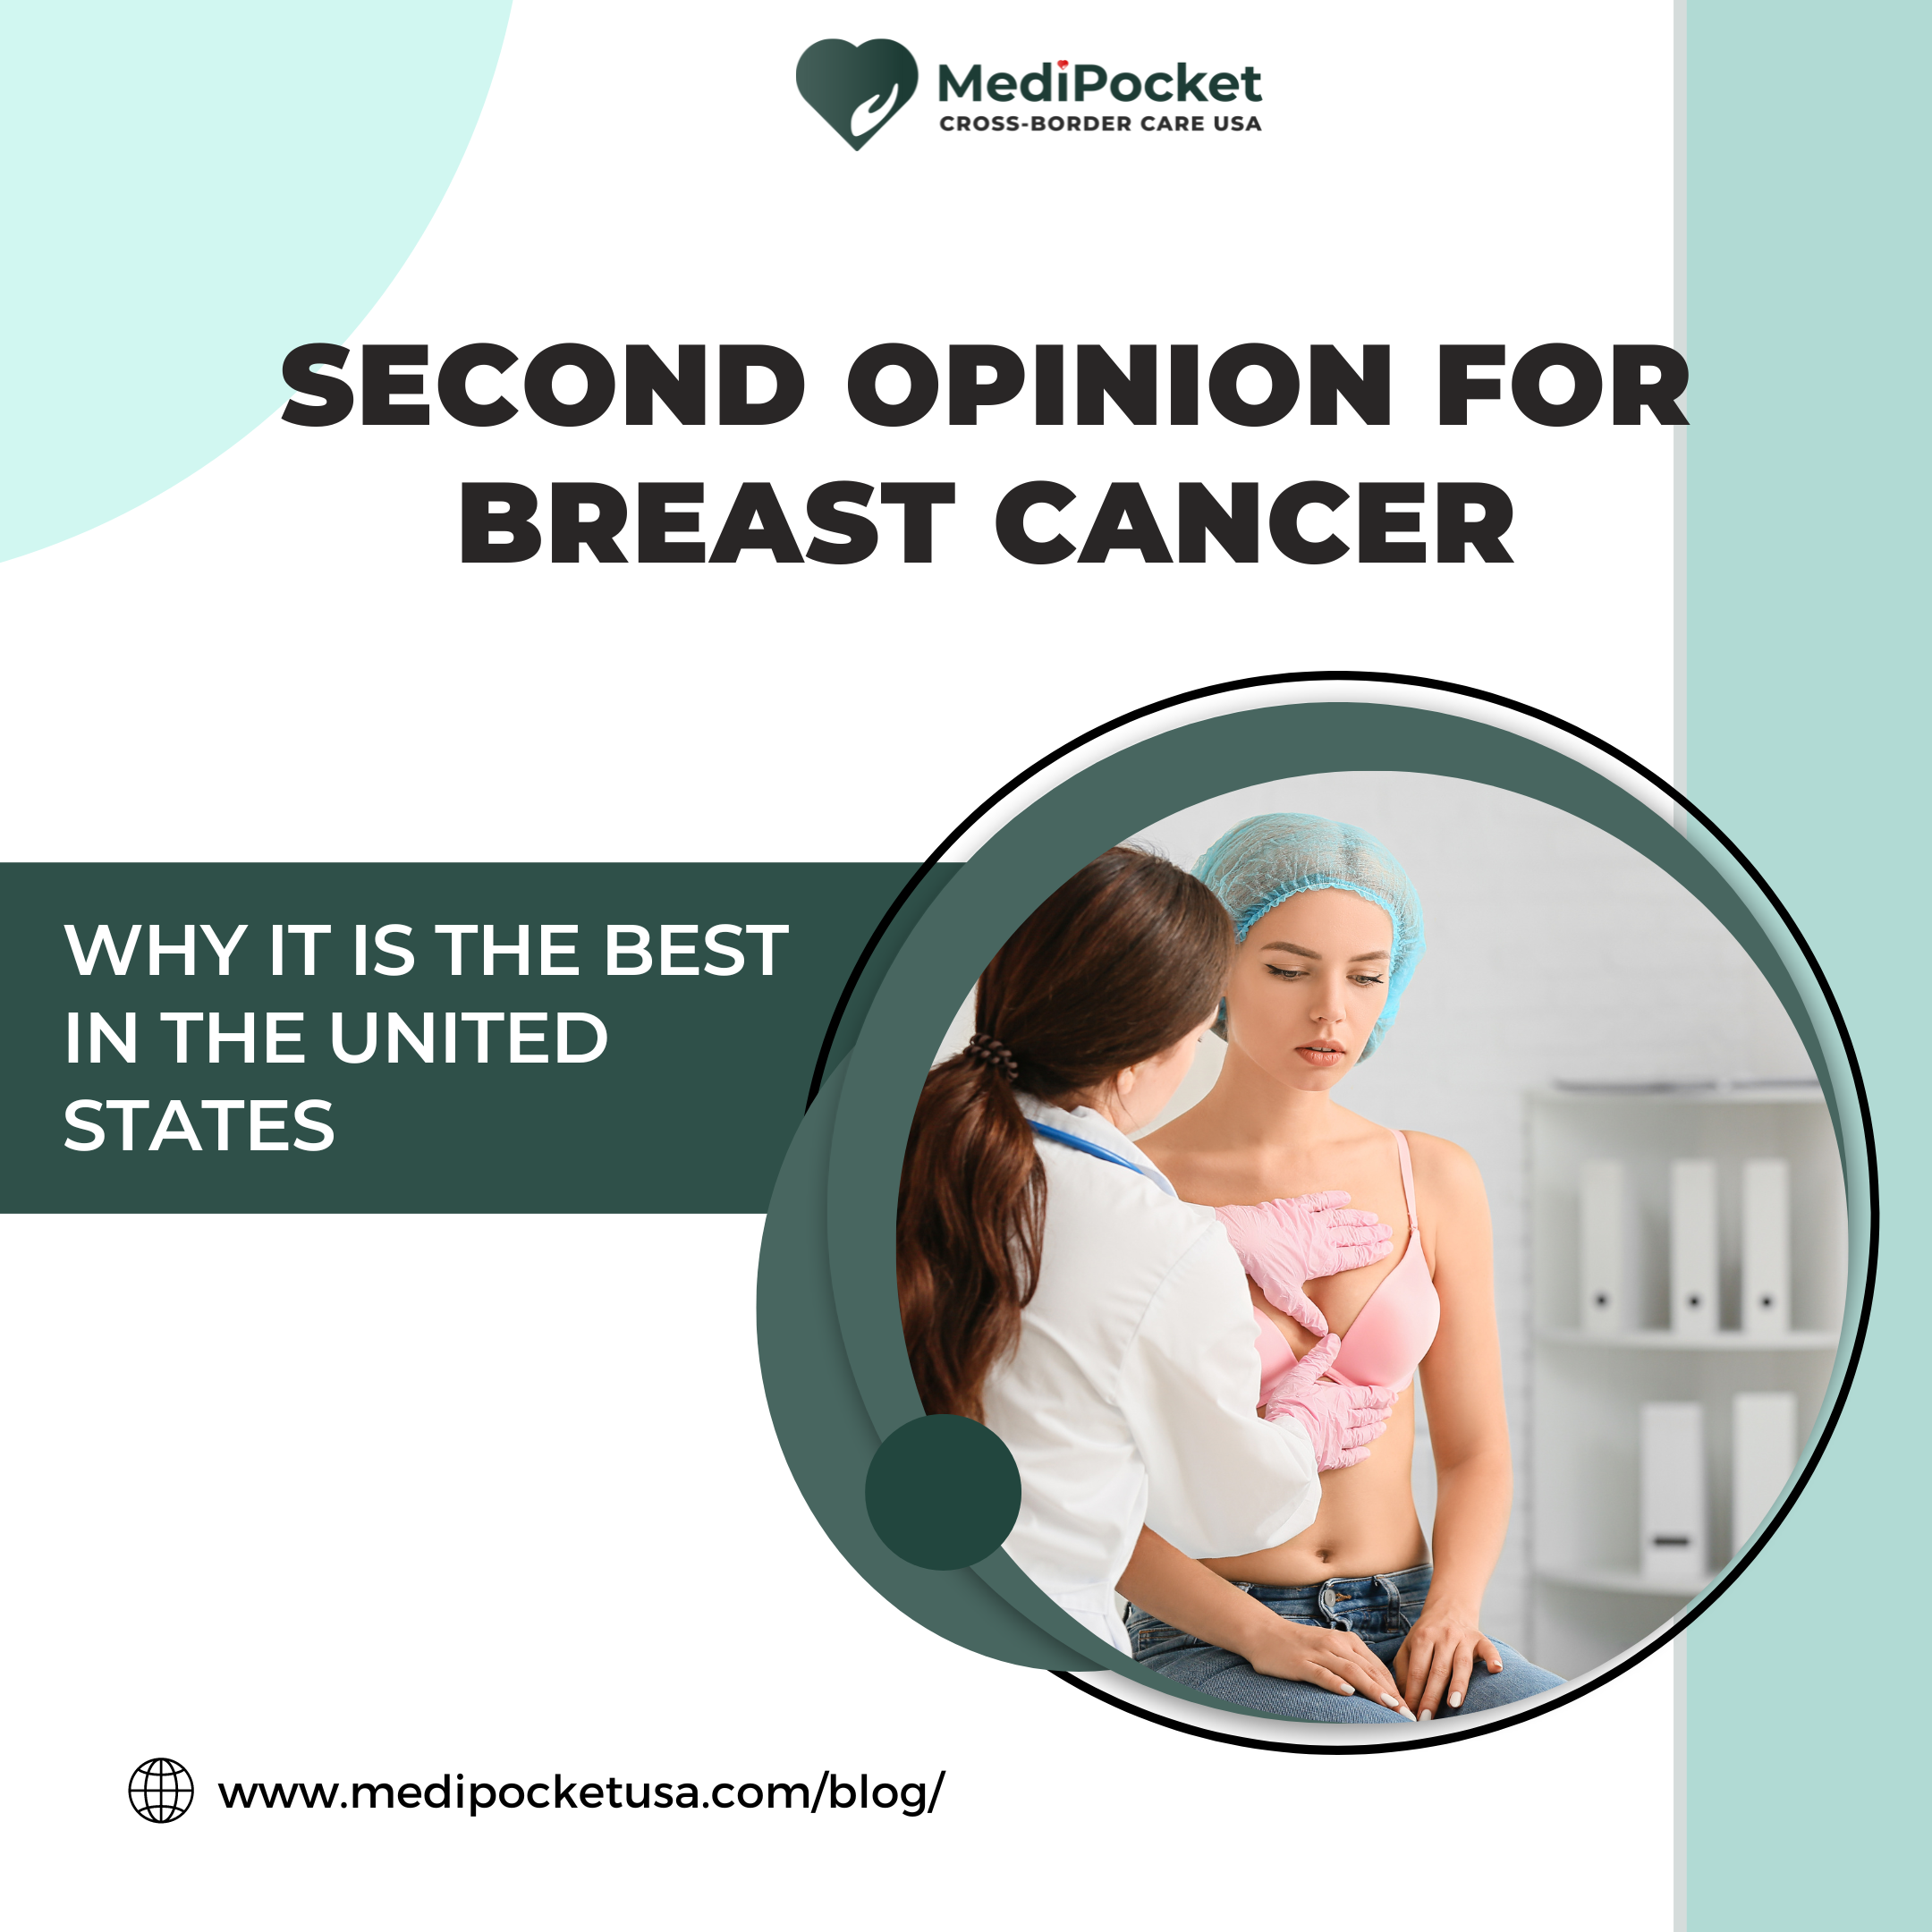 Second Opinion for Breast Cancer - MediPocket USA